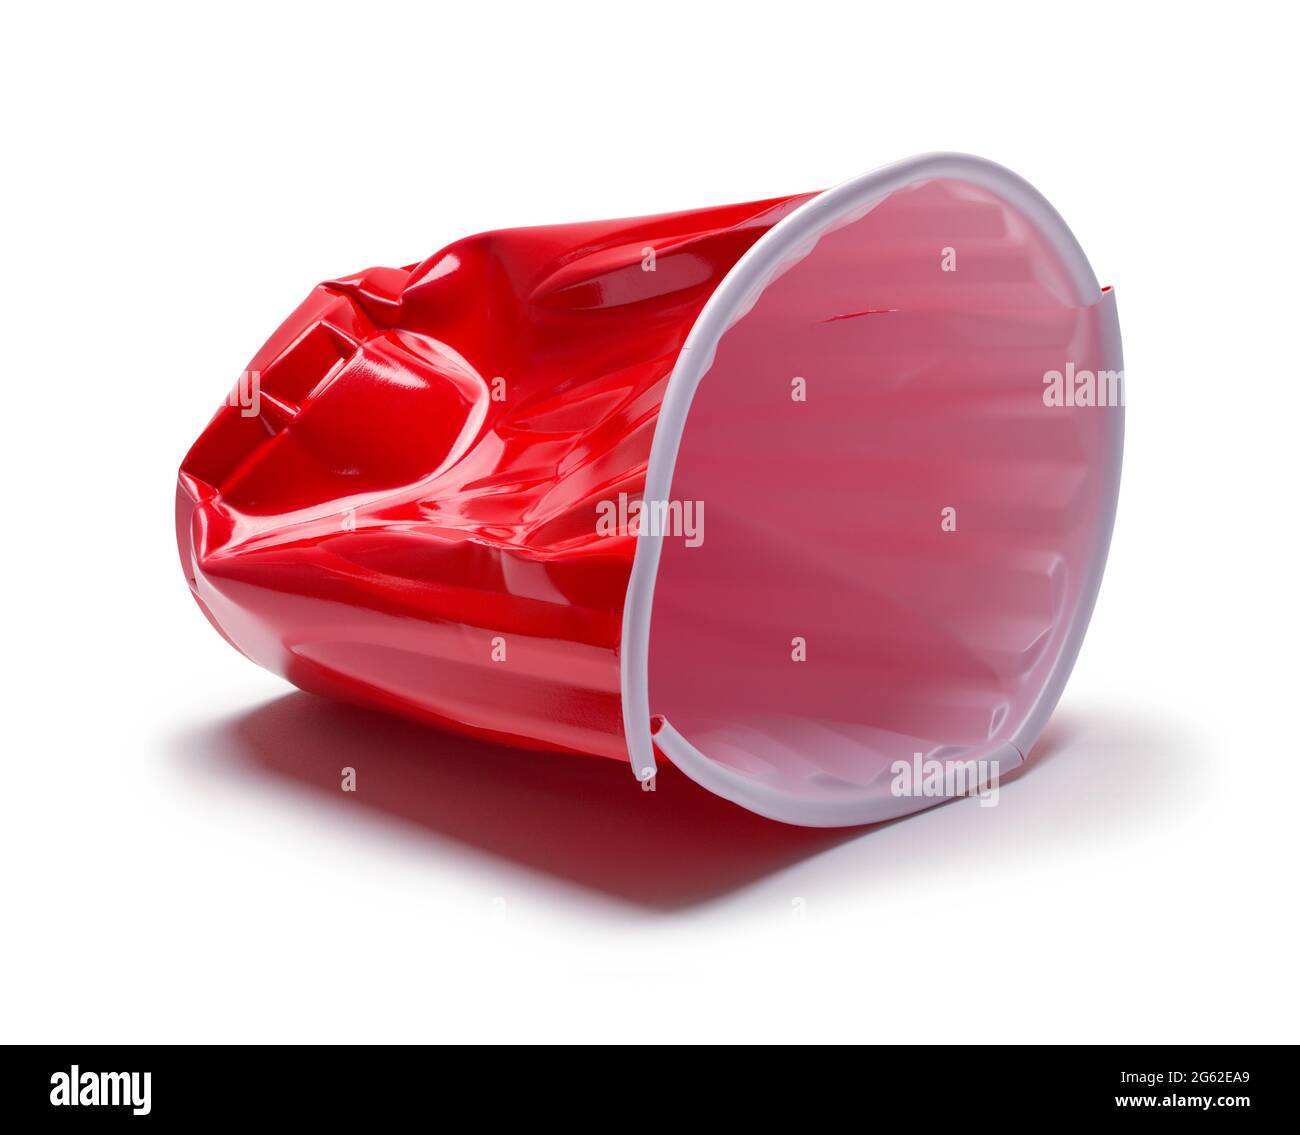 https://c8.alamy.com/comp/2G62EA9/broken-red-plastic-cup-cut-out-on-white-2G62EA9.jpg